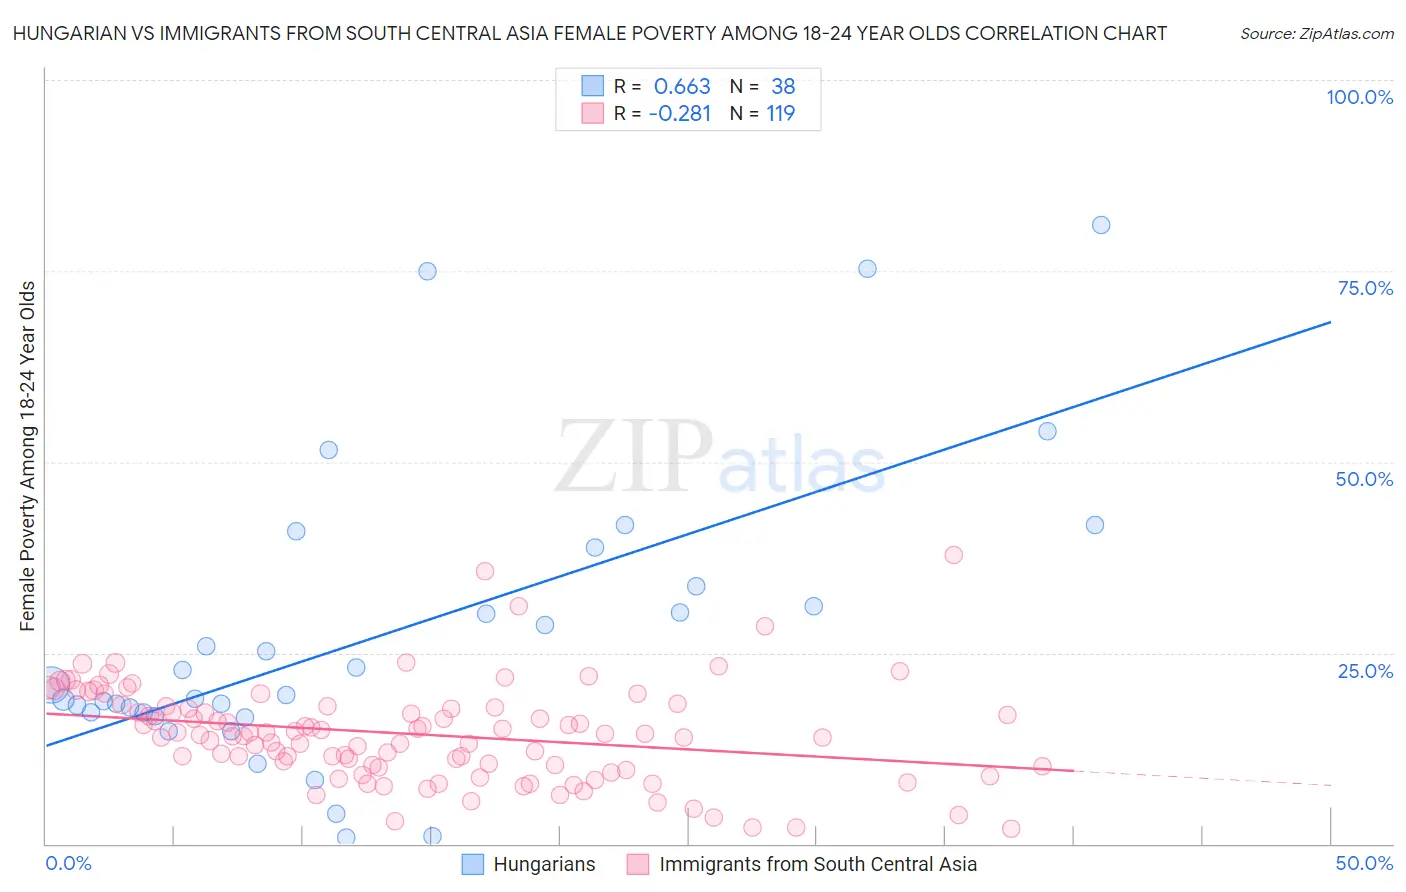 Hungarian vs Immigrants from South Central Asia Female Poverty Among 18-24 Year Olds